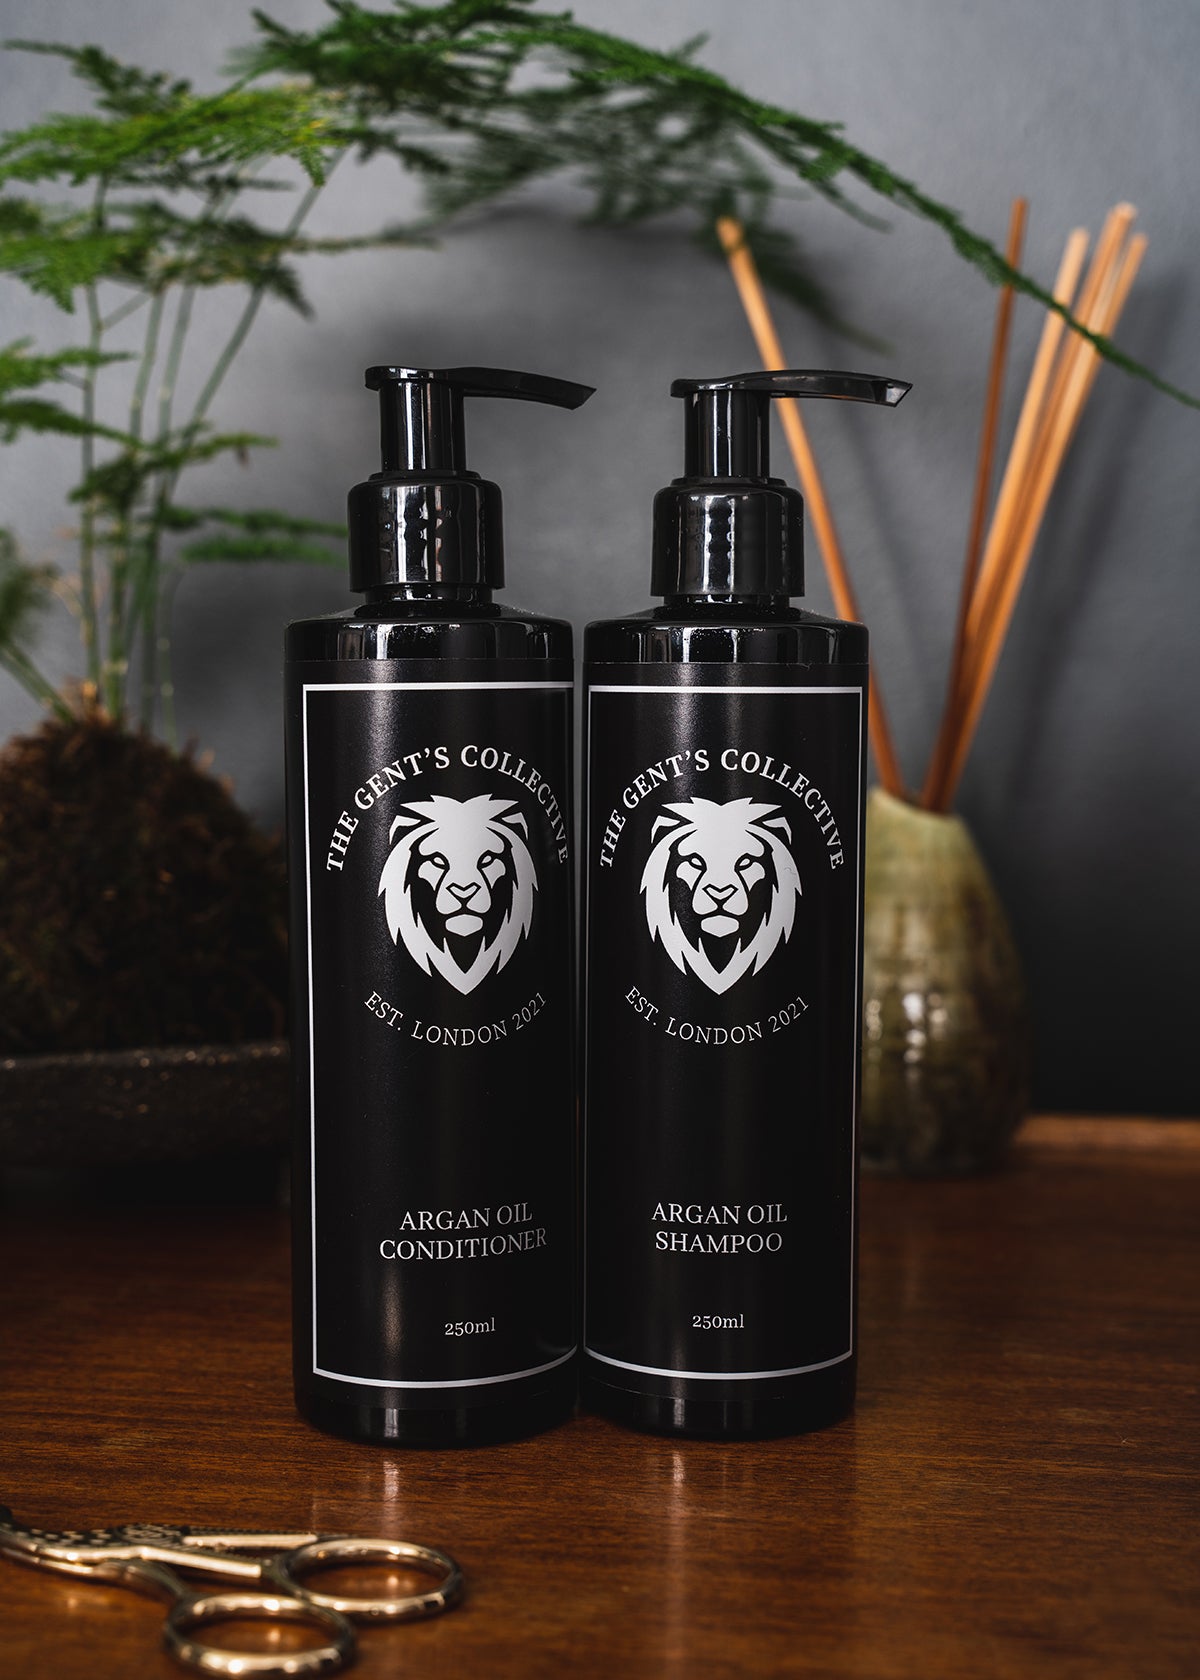 th bælte ebbe tidevand 25% Off | Argan Oil Shampoo & Conditioner Set – The Gent's Collective